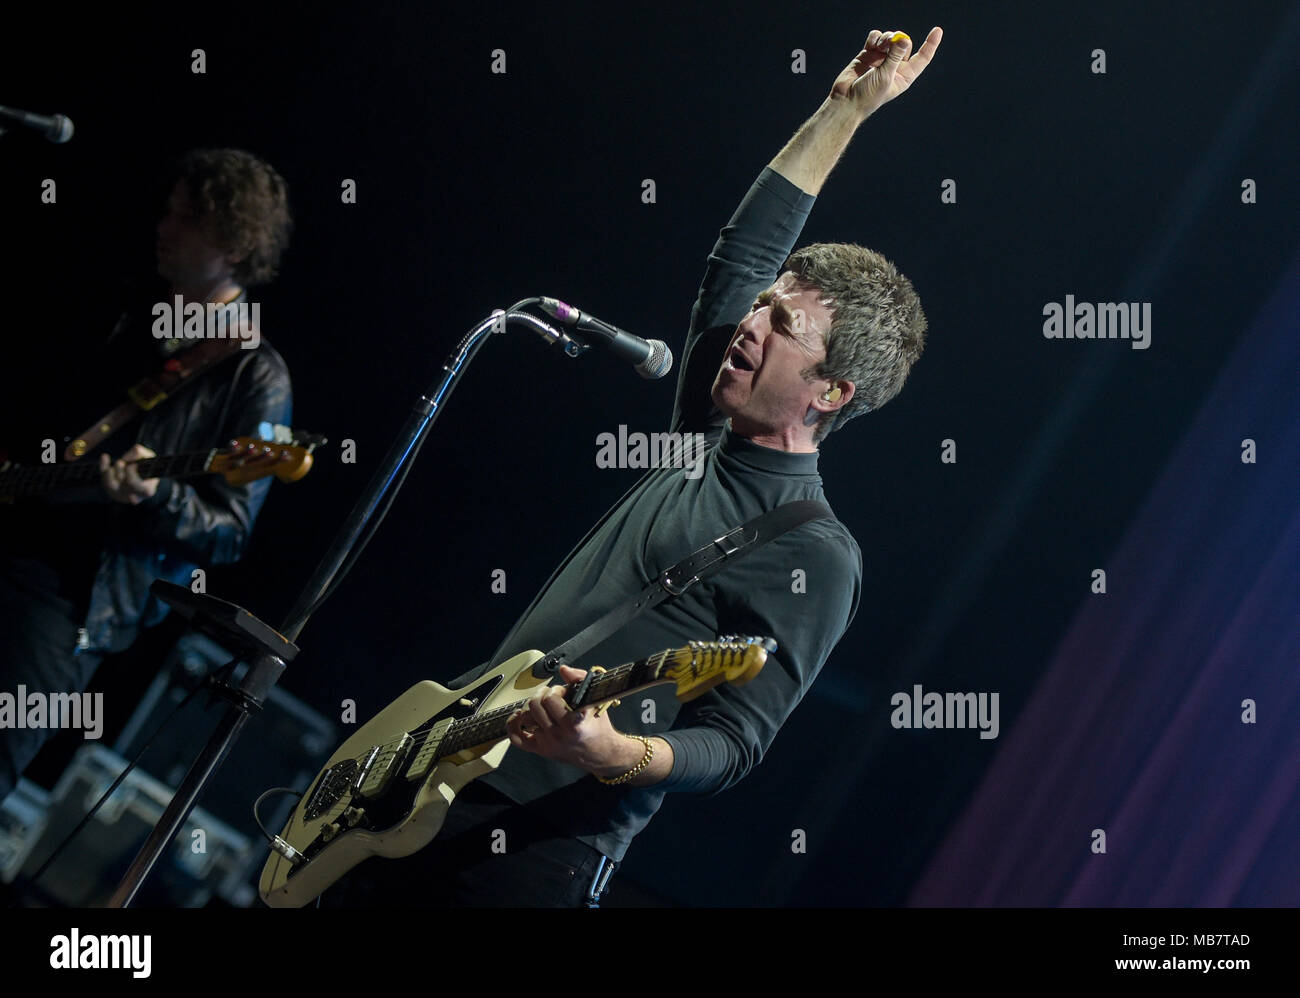 Hamburg, Germany. 08 April 2018, Germany, Hamburg: The British singer and songwriter Noel Gallagher, one of the founders of the band Oasis, standing on the stage at the Mehr! theatre at the kick-off of his tour. Gallagher and his band High Flying Birds will also play in Duesseldorf (9.4.), Munich (12.4.), Berlin (16.4.) and Wiesbaden (17.4.). Photo: Axel Heimken/dpa Credit: dpa picture alliance/Alamy Live News Stock Photo